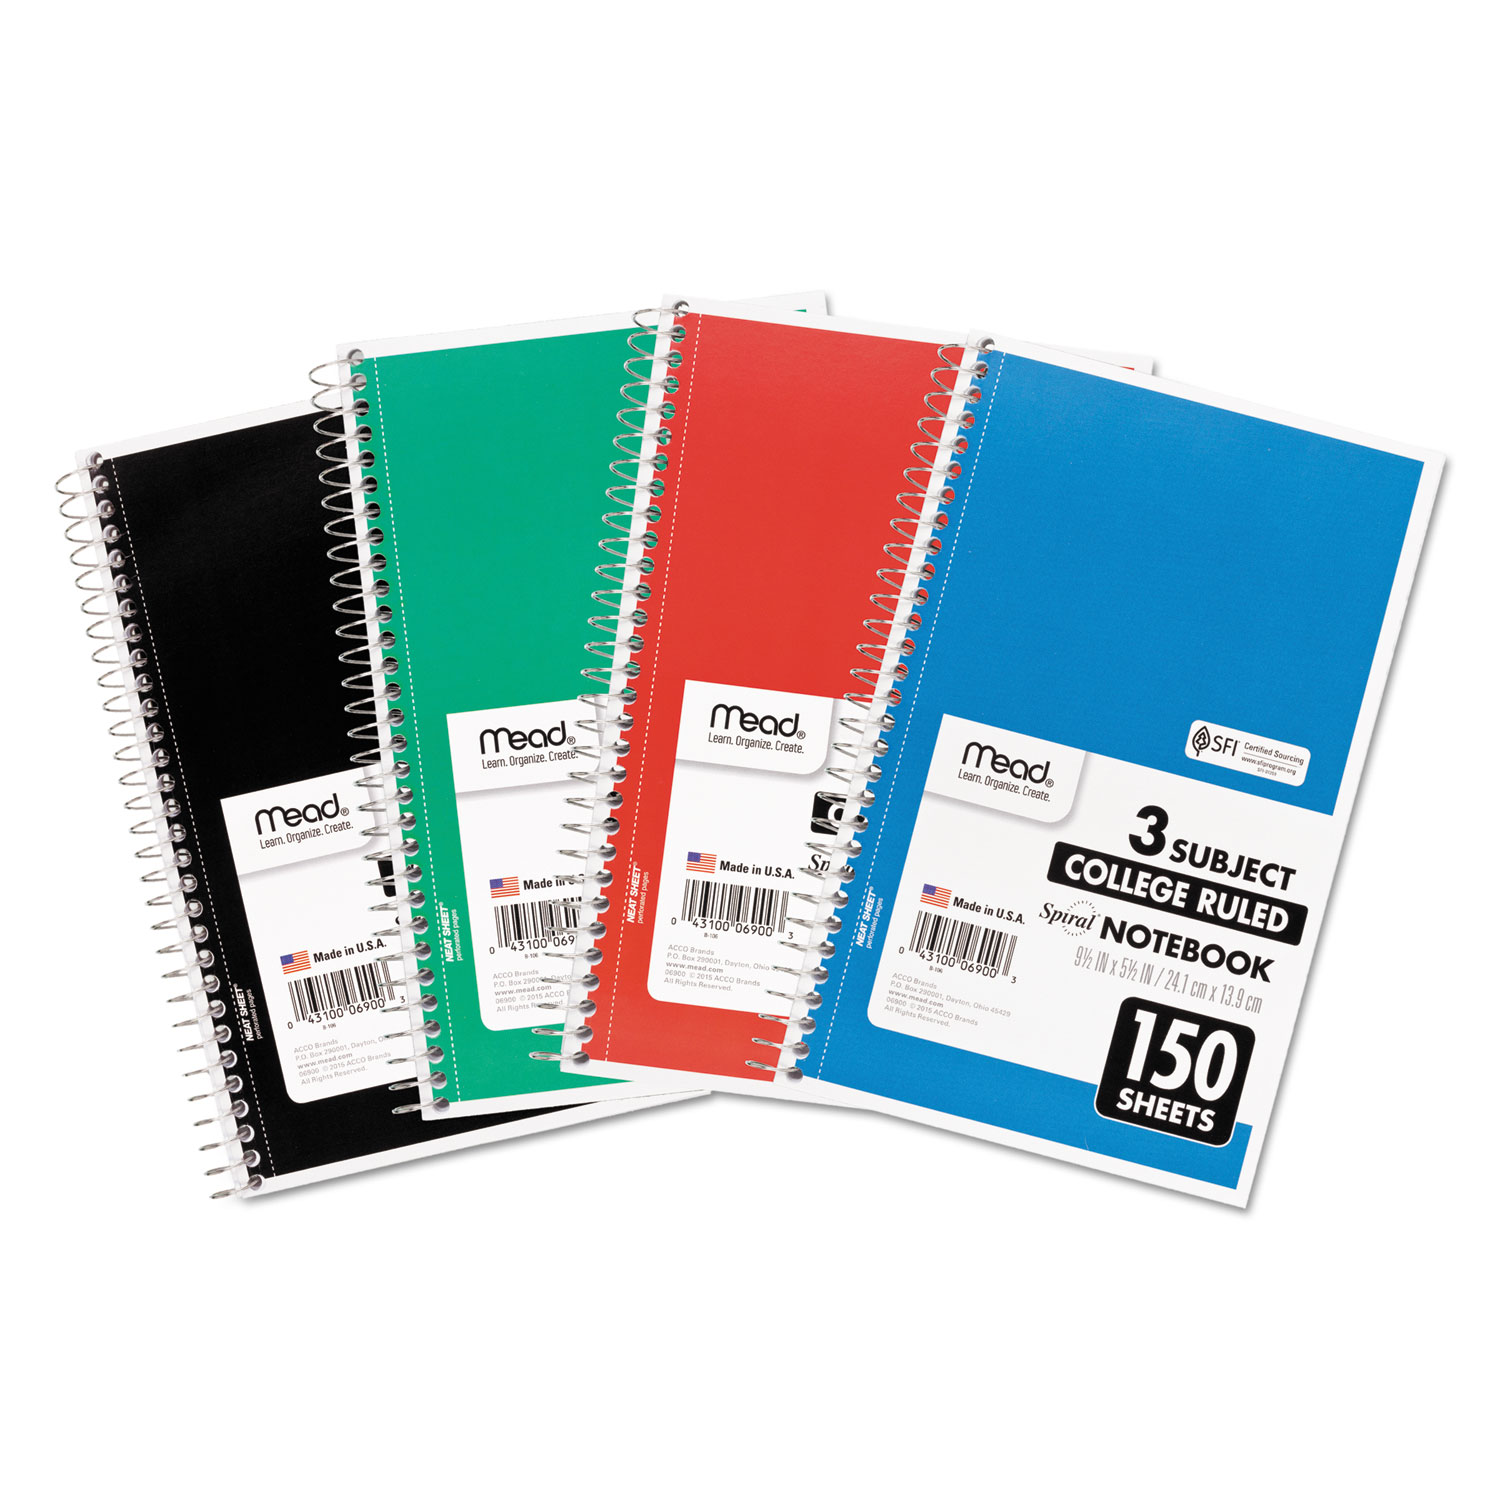  Mead 06900 Spiral Notebook, 3 Subjects, Medium/College Rule, Assorted Color Covers, 9.5 x 5.5, 150 Sheets (MEA06900) 